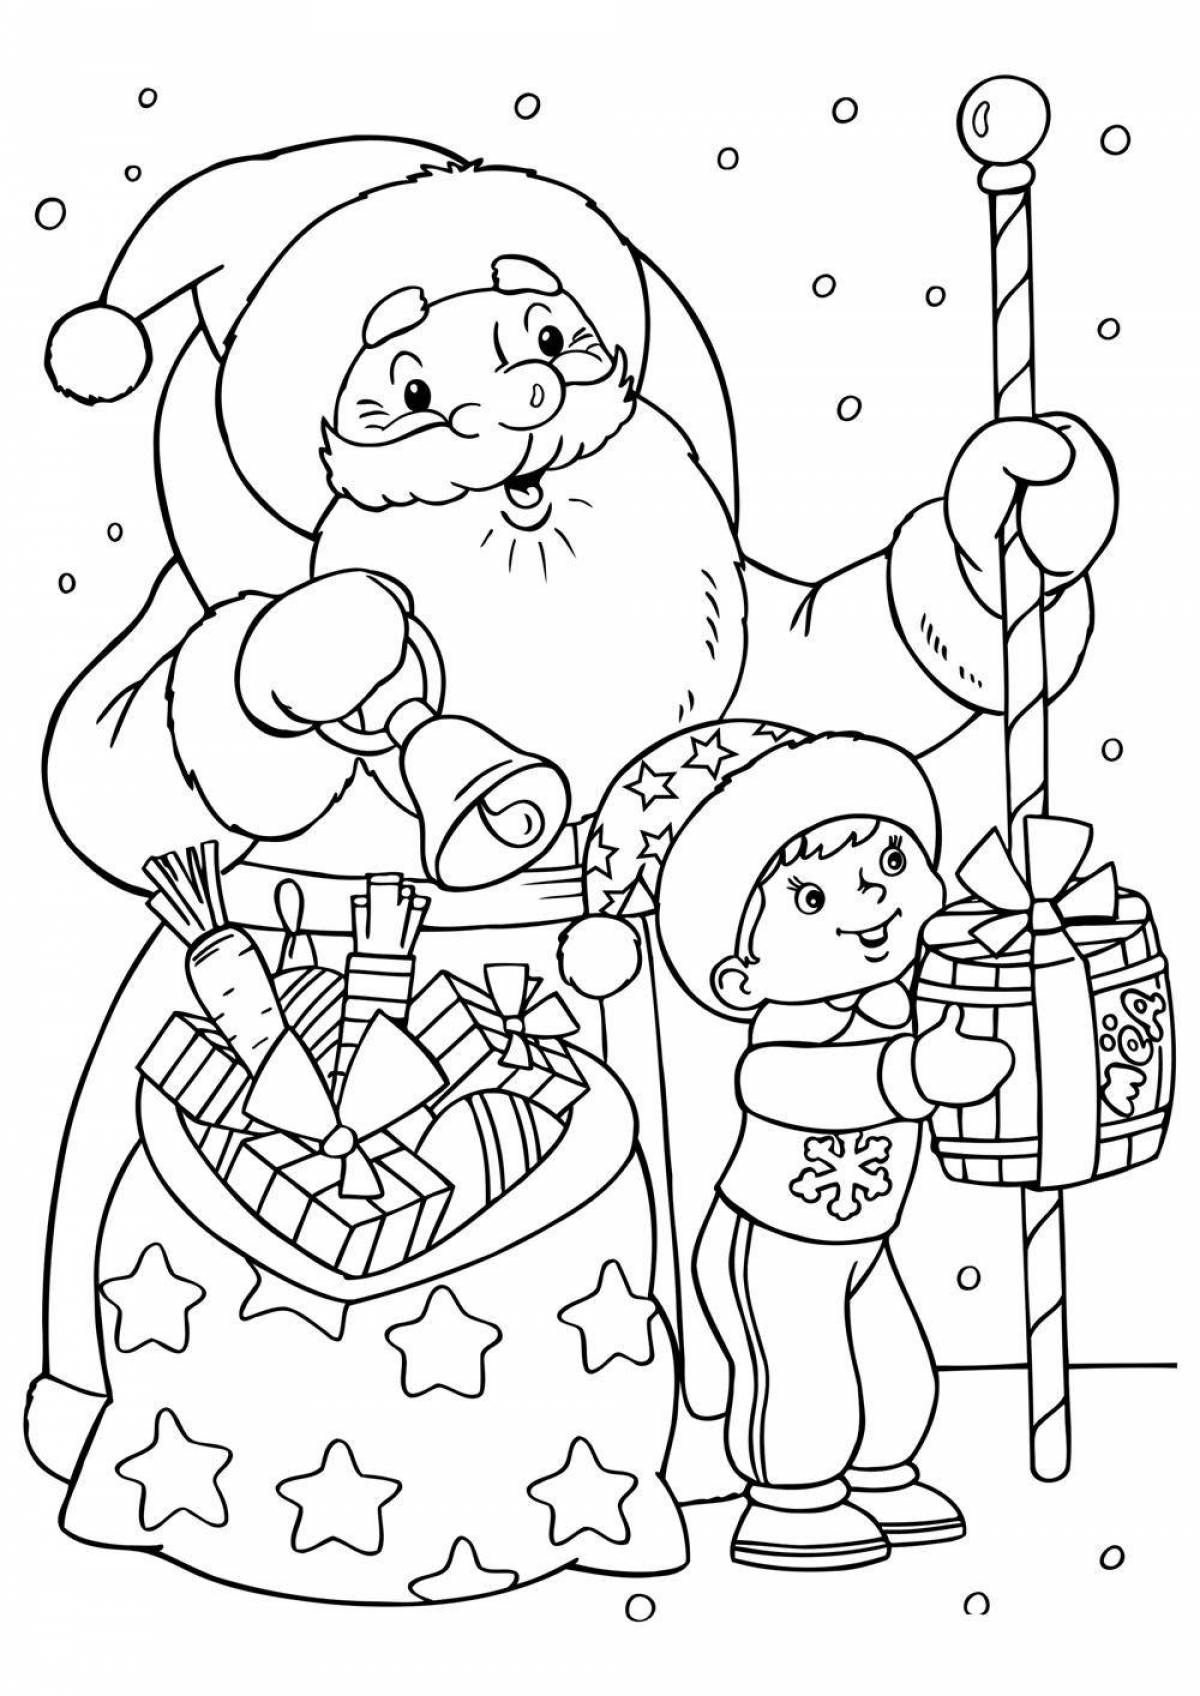 Playful santa claus coloring page for girls